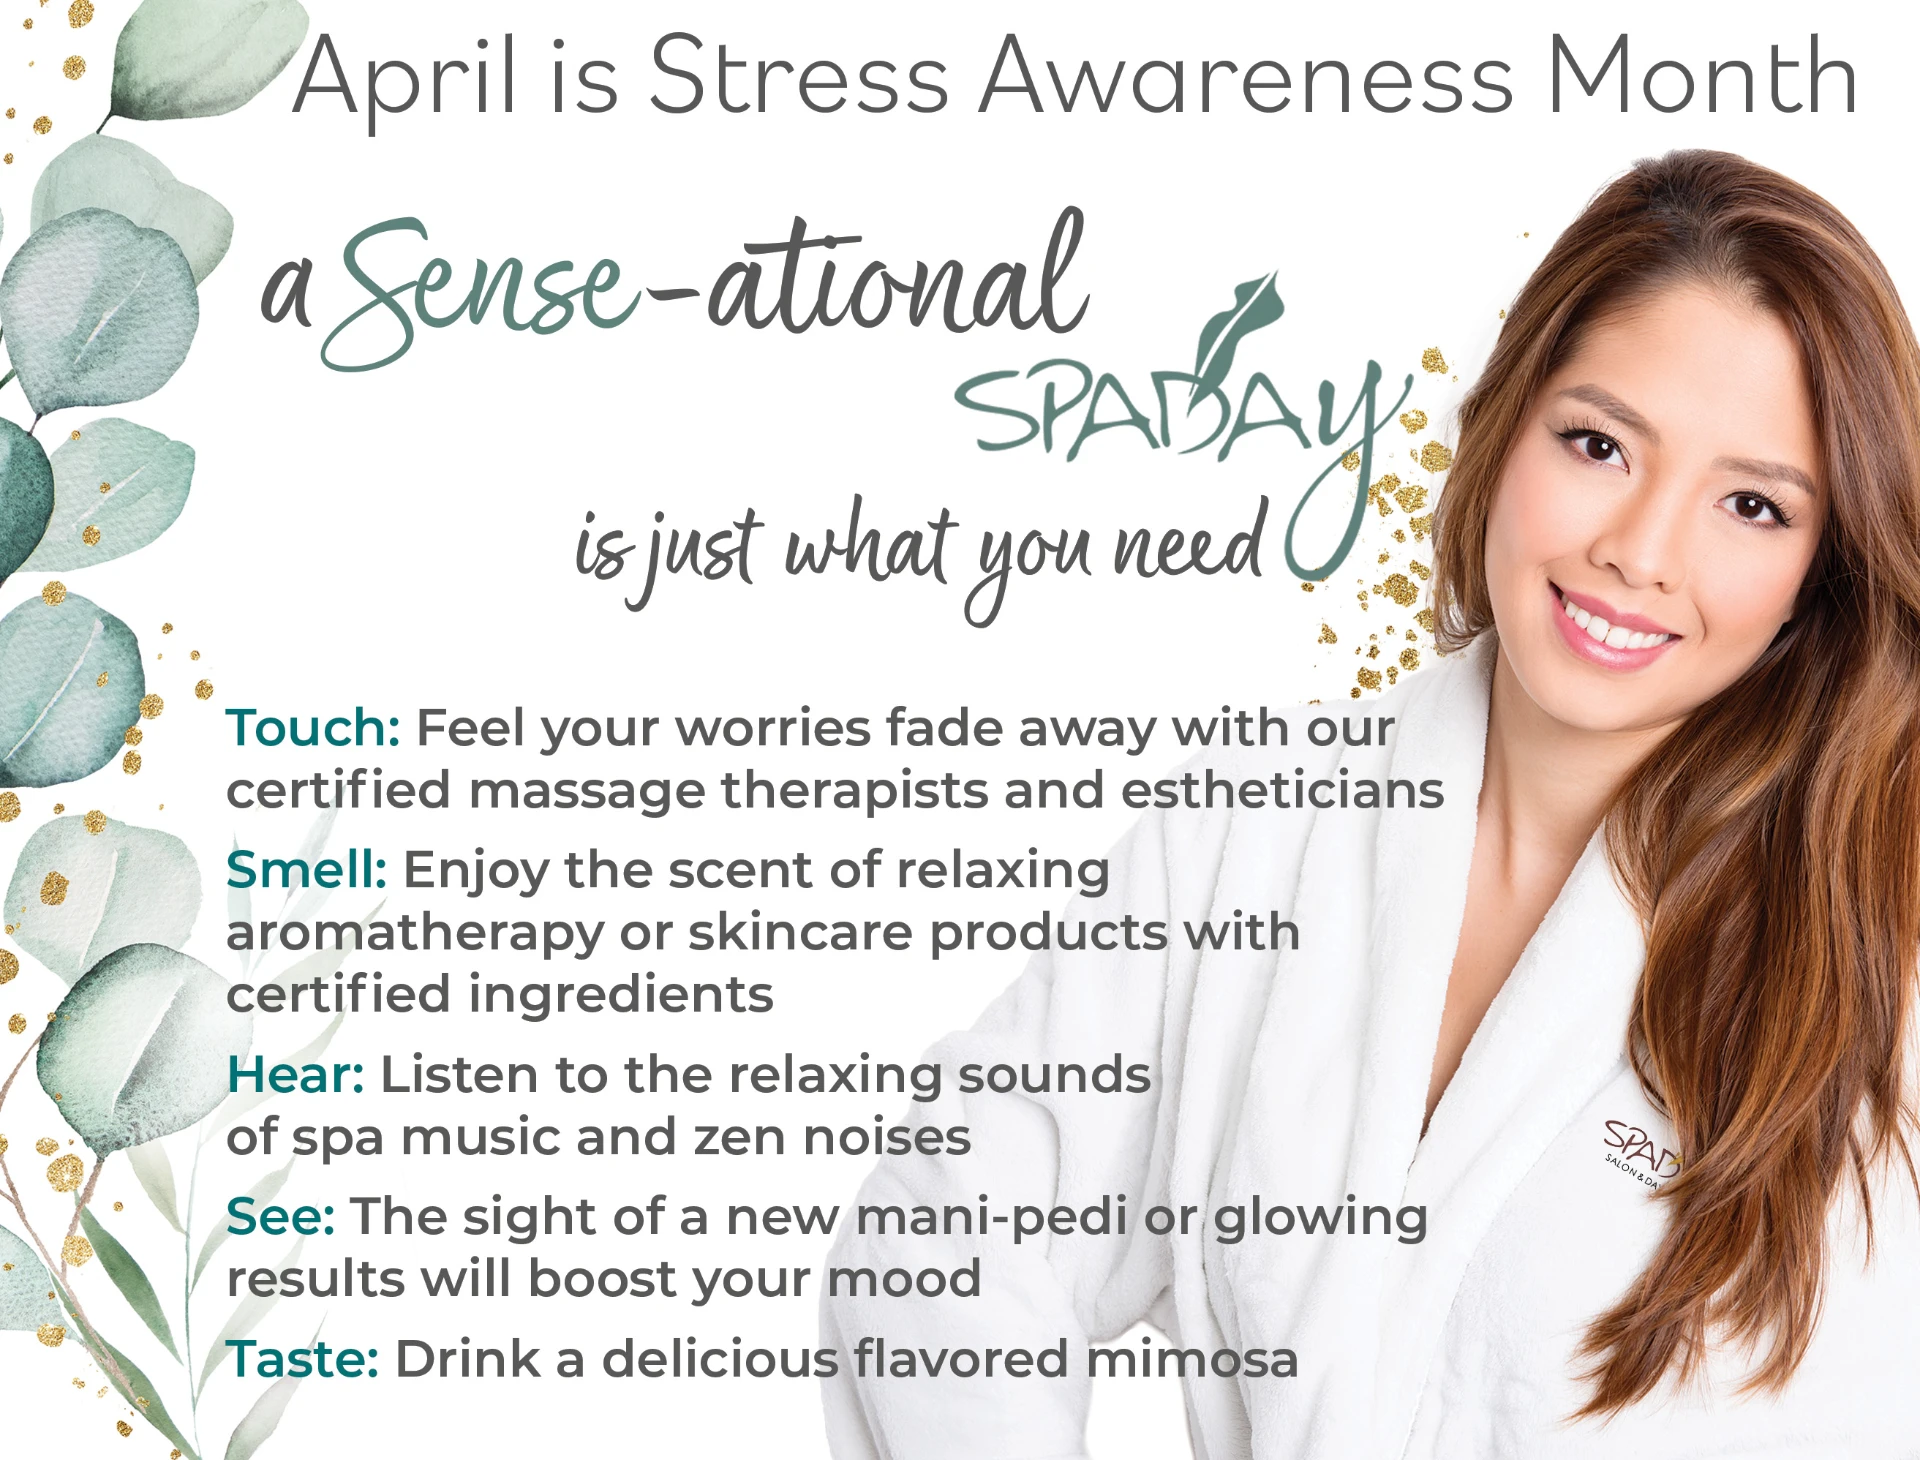 April is Stress Awareness Month. A Sense-ational Spaday is just what you need. Touch. Feel your worries fade away with our certified massage therapists and estheticians. Smell. Enjoy the scent of relaxing aromatherapy or skincare products with certified ingredients. Hear. Listen to the relaxing sounds of spa music and zen noises. See. The sight of a new mani-pedi or glowing results will boost your mood. Taste. Drink a delicious flavored mimosa.